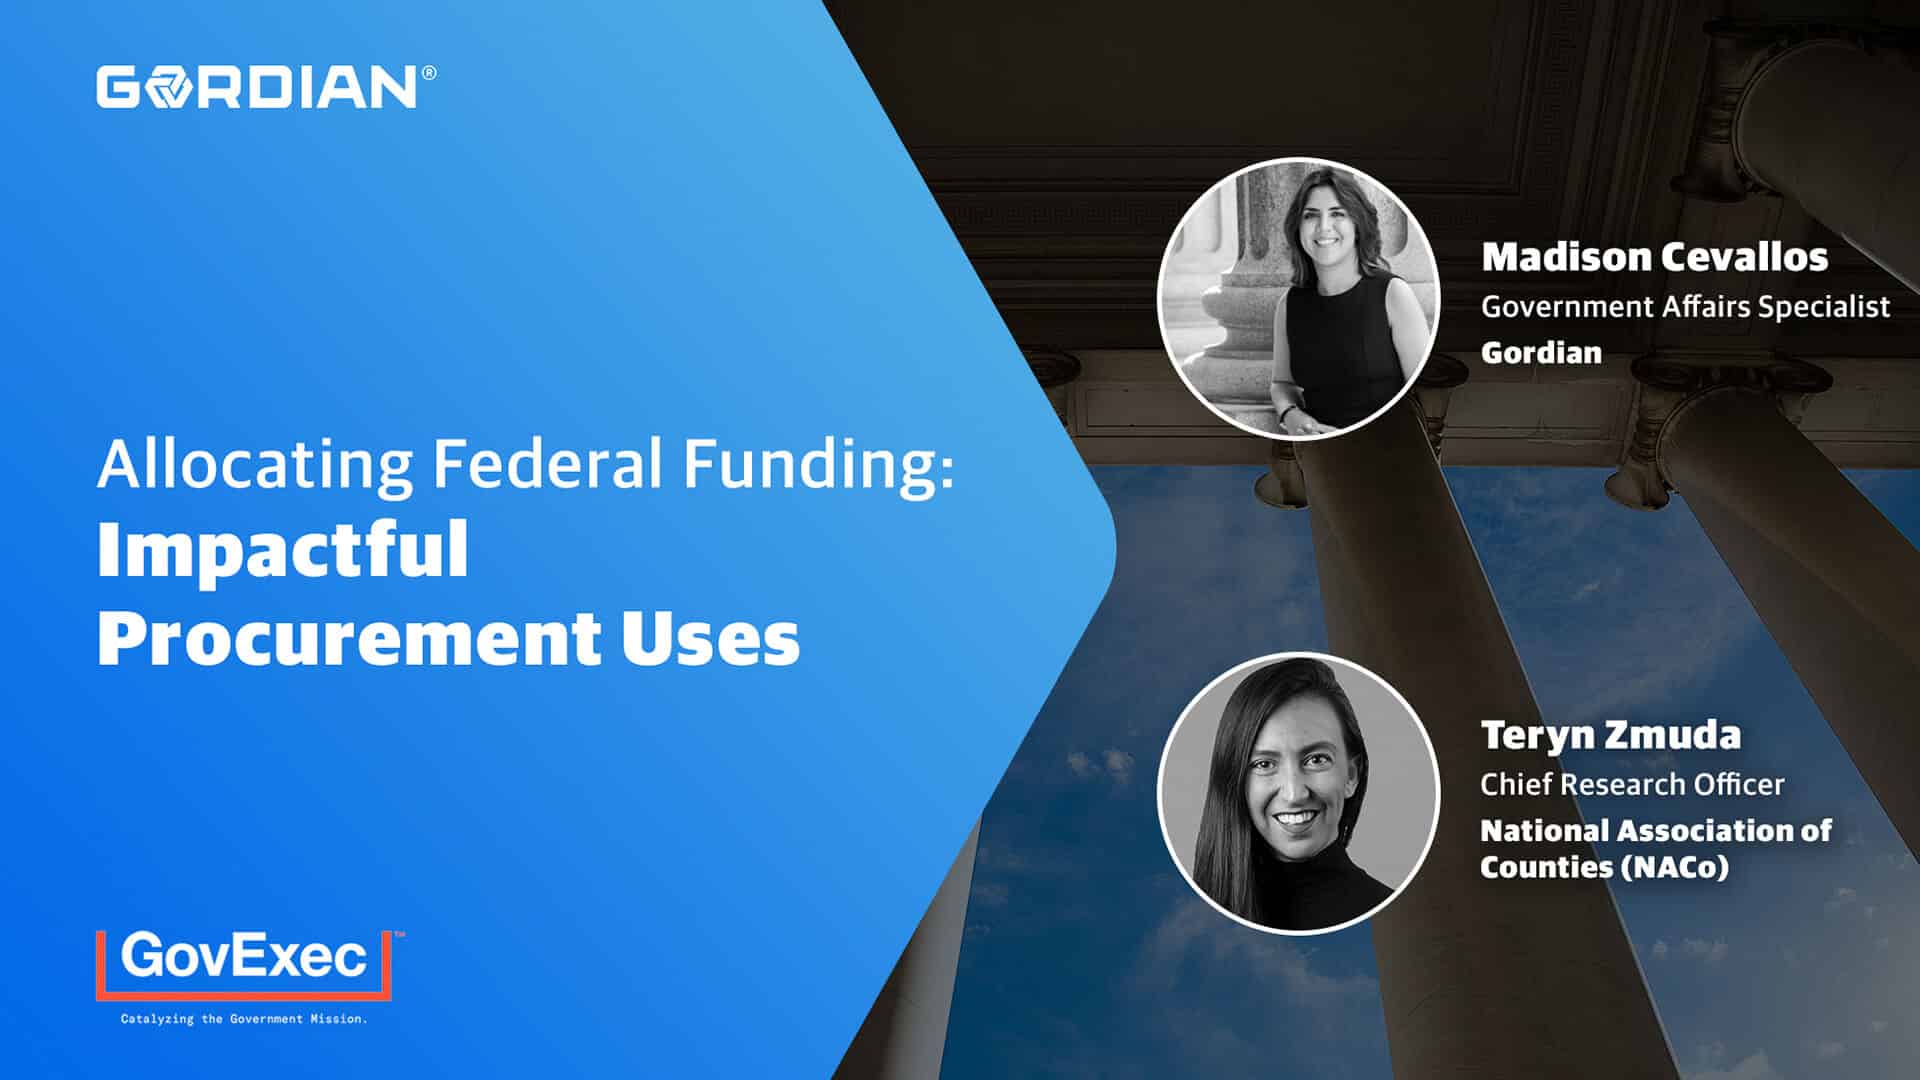 Allocating Federal Funding: Impactful Procurement Uses